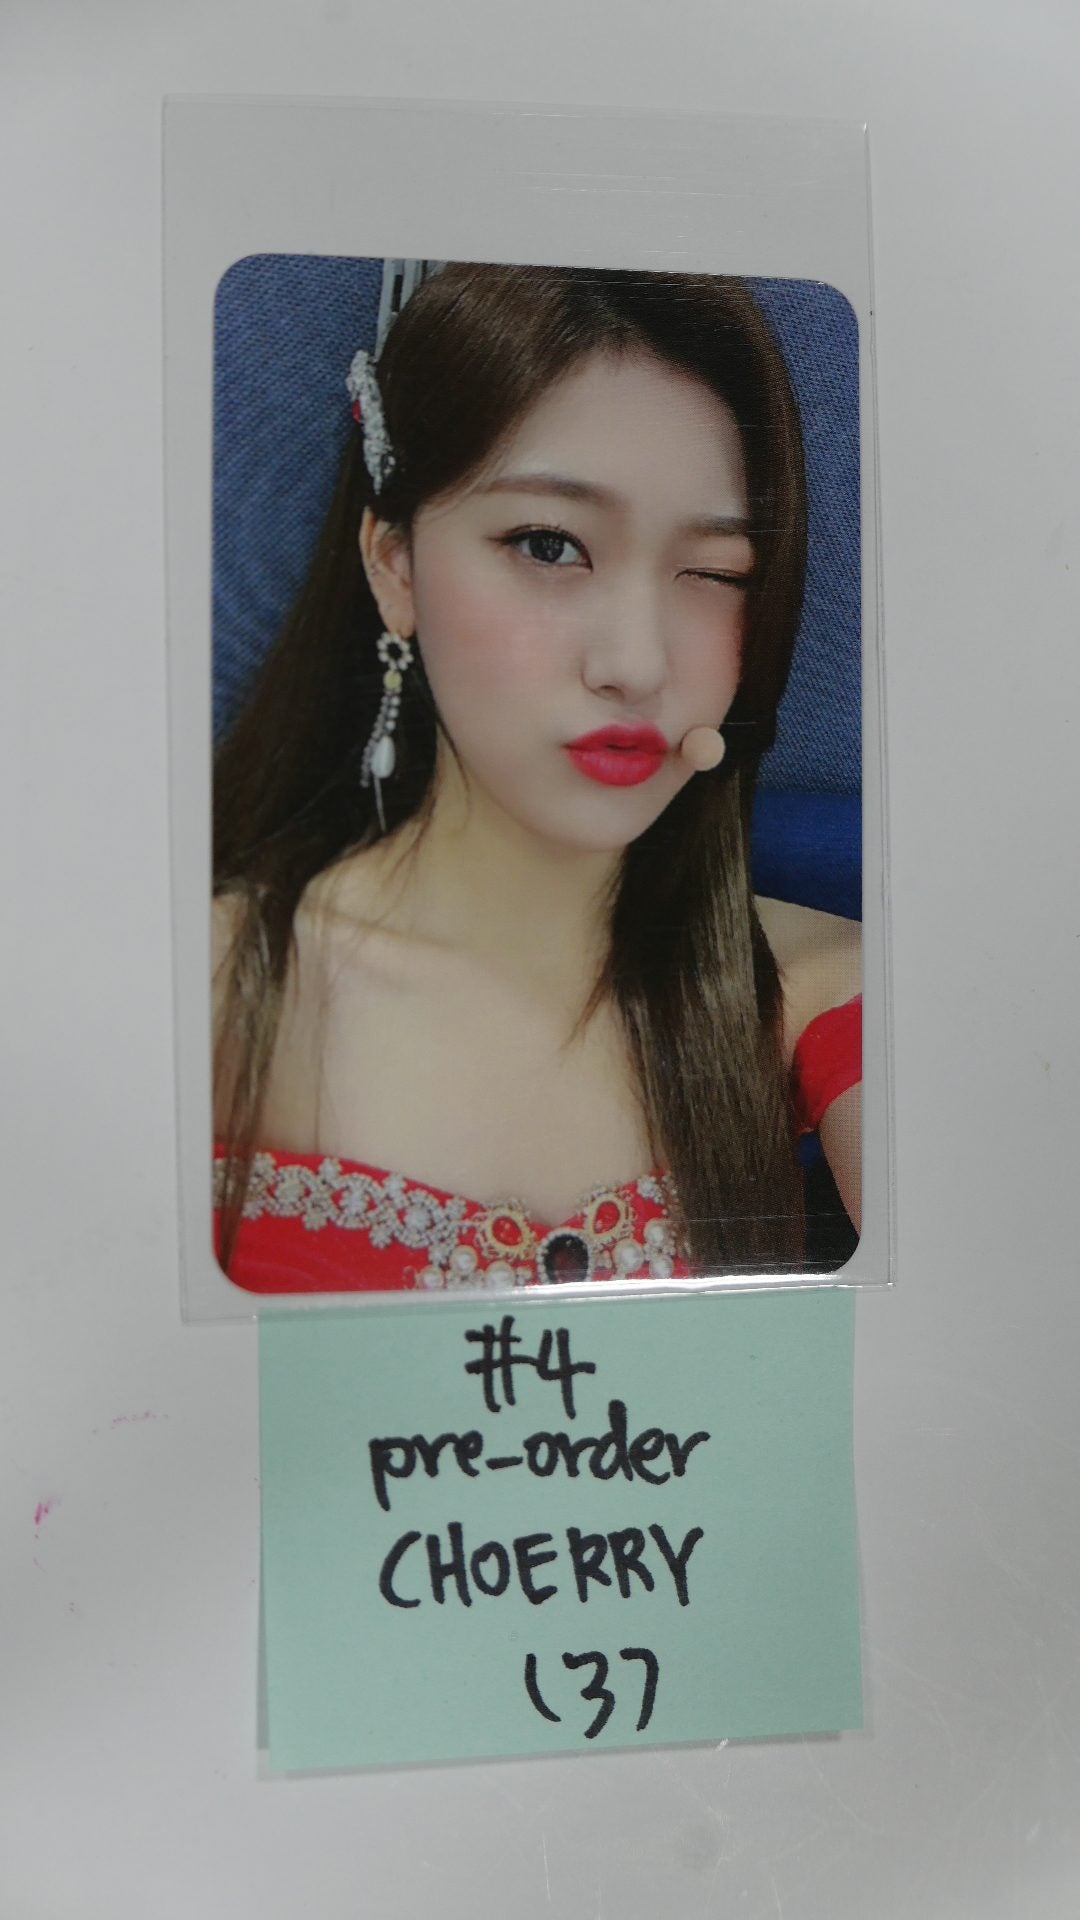 Loona 12:00 - Pre-order (MMT, WithD, Etc) benefit photocard - Choerry